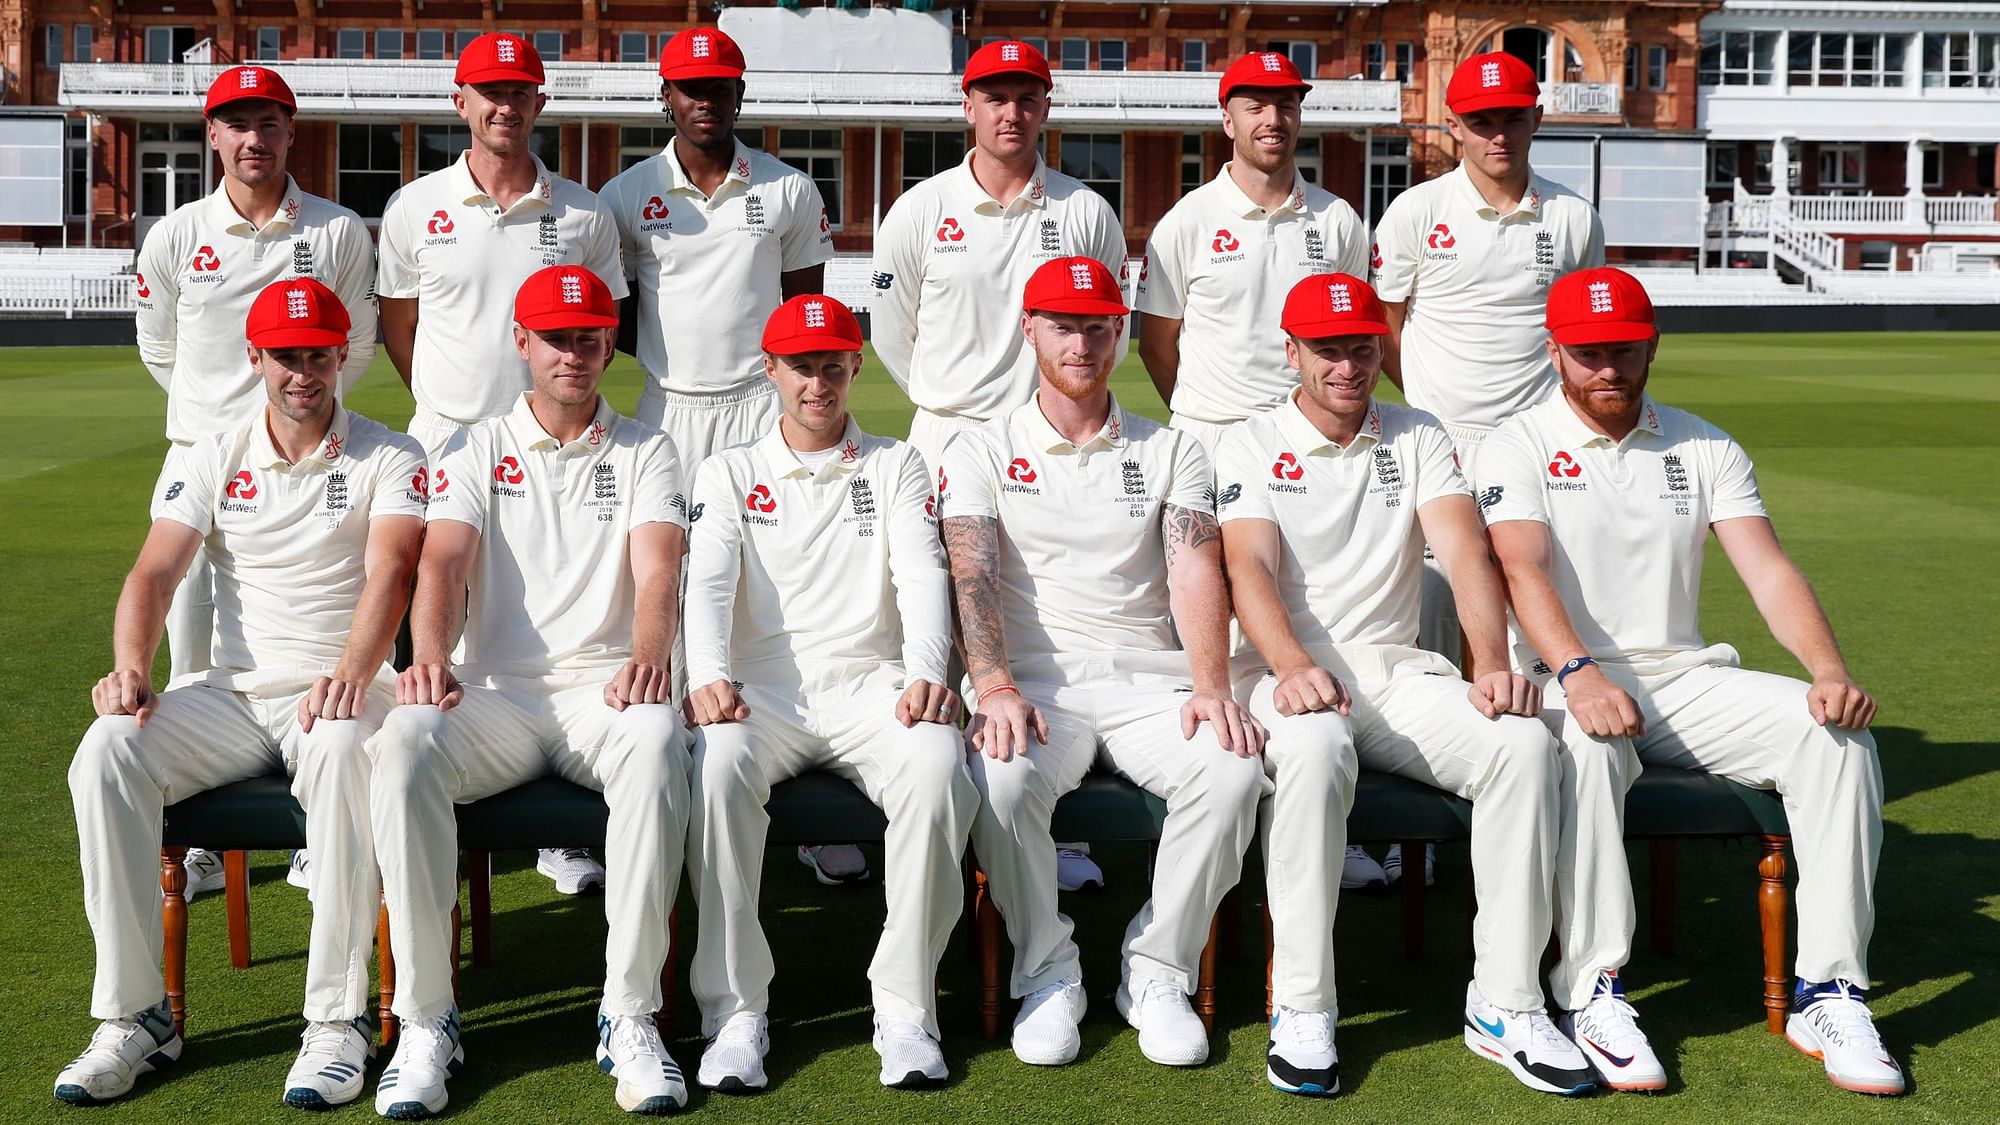 England and West Indies will play a 3-match Test series starting 8 July.